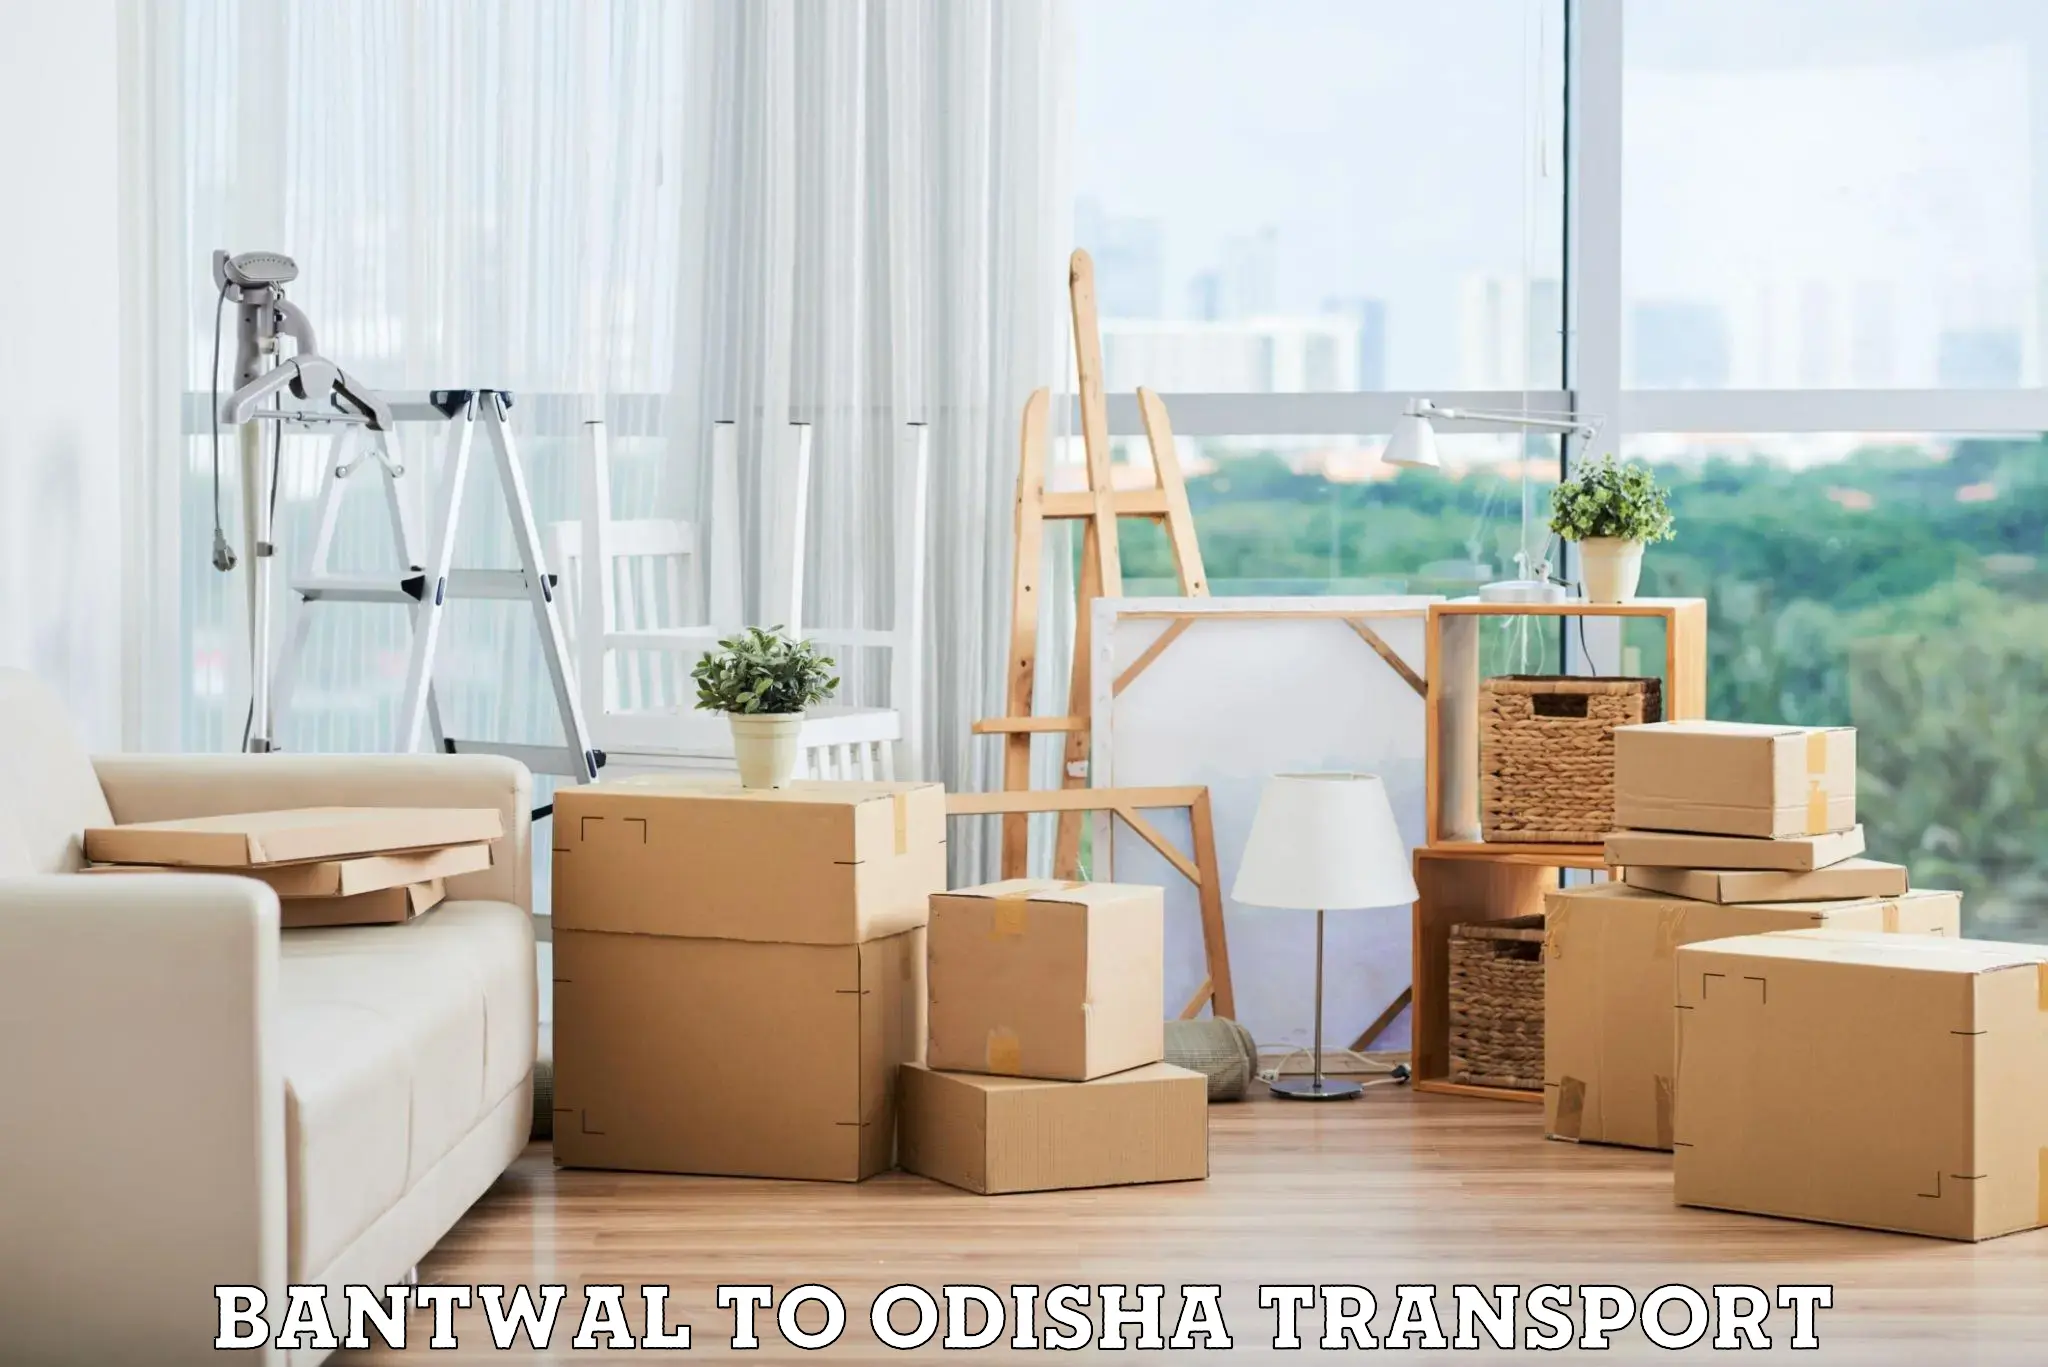 Nationwide transport services Bantwal to Odisha